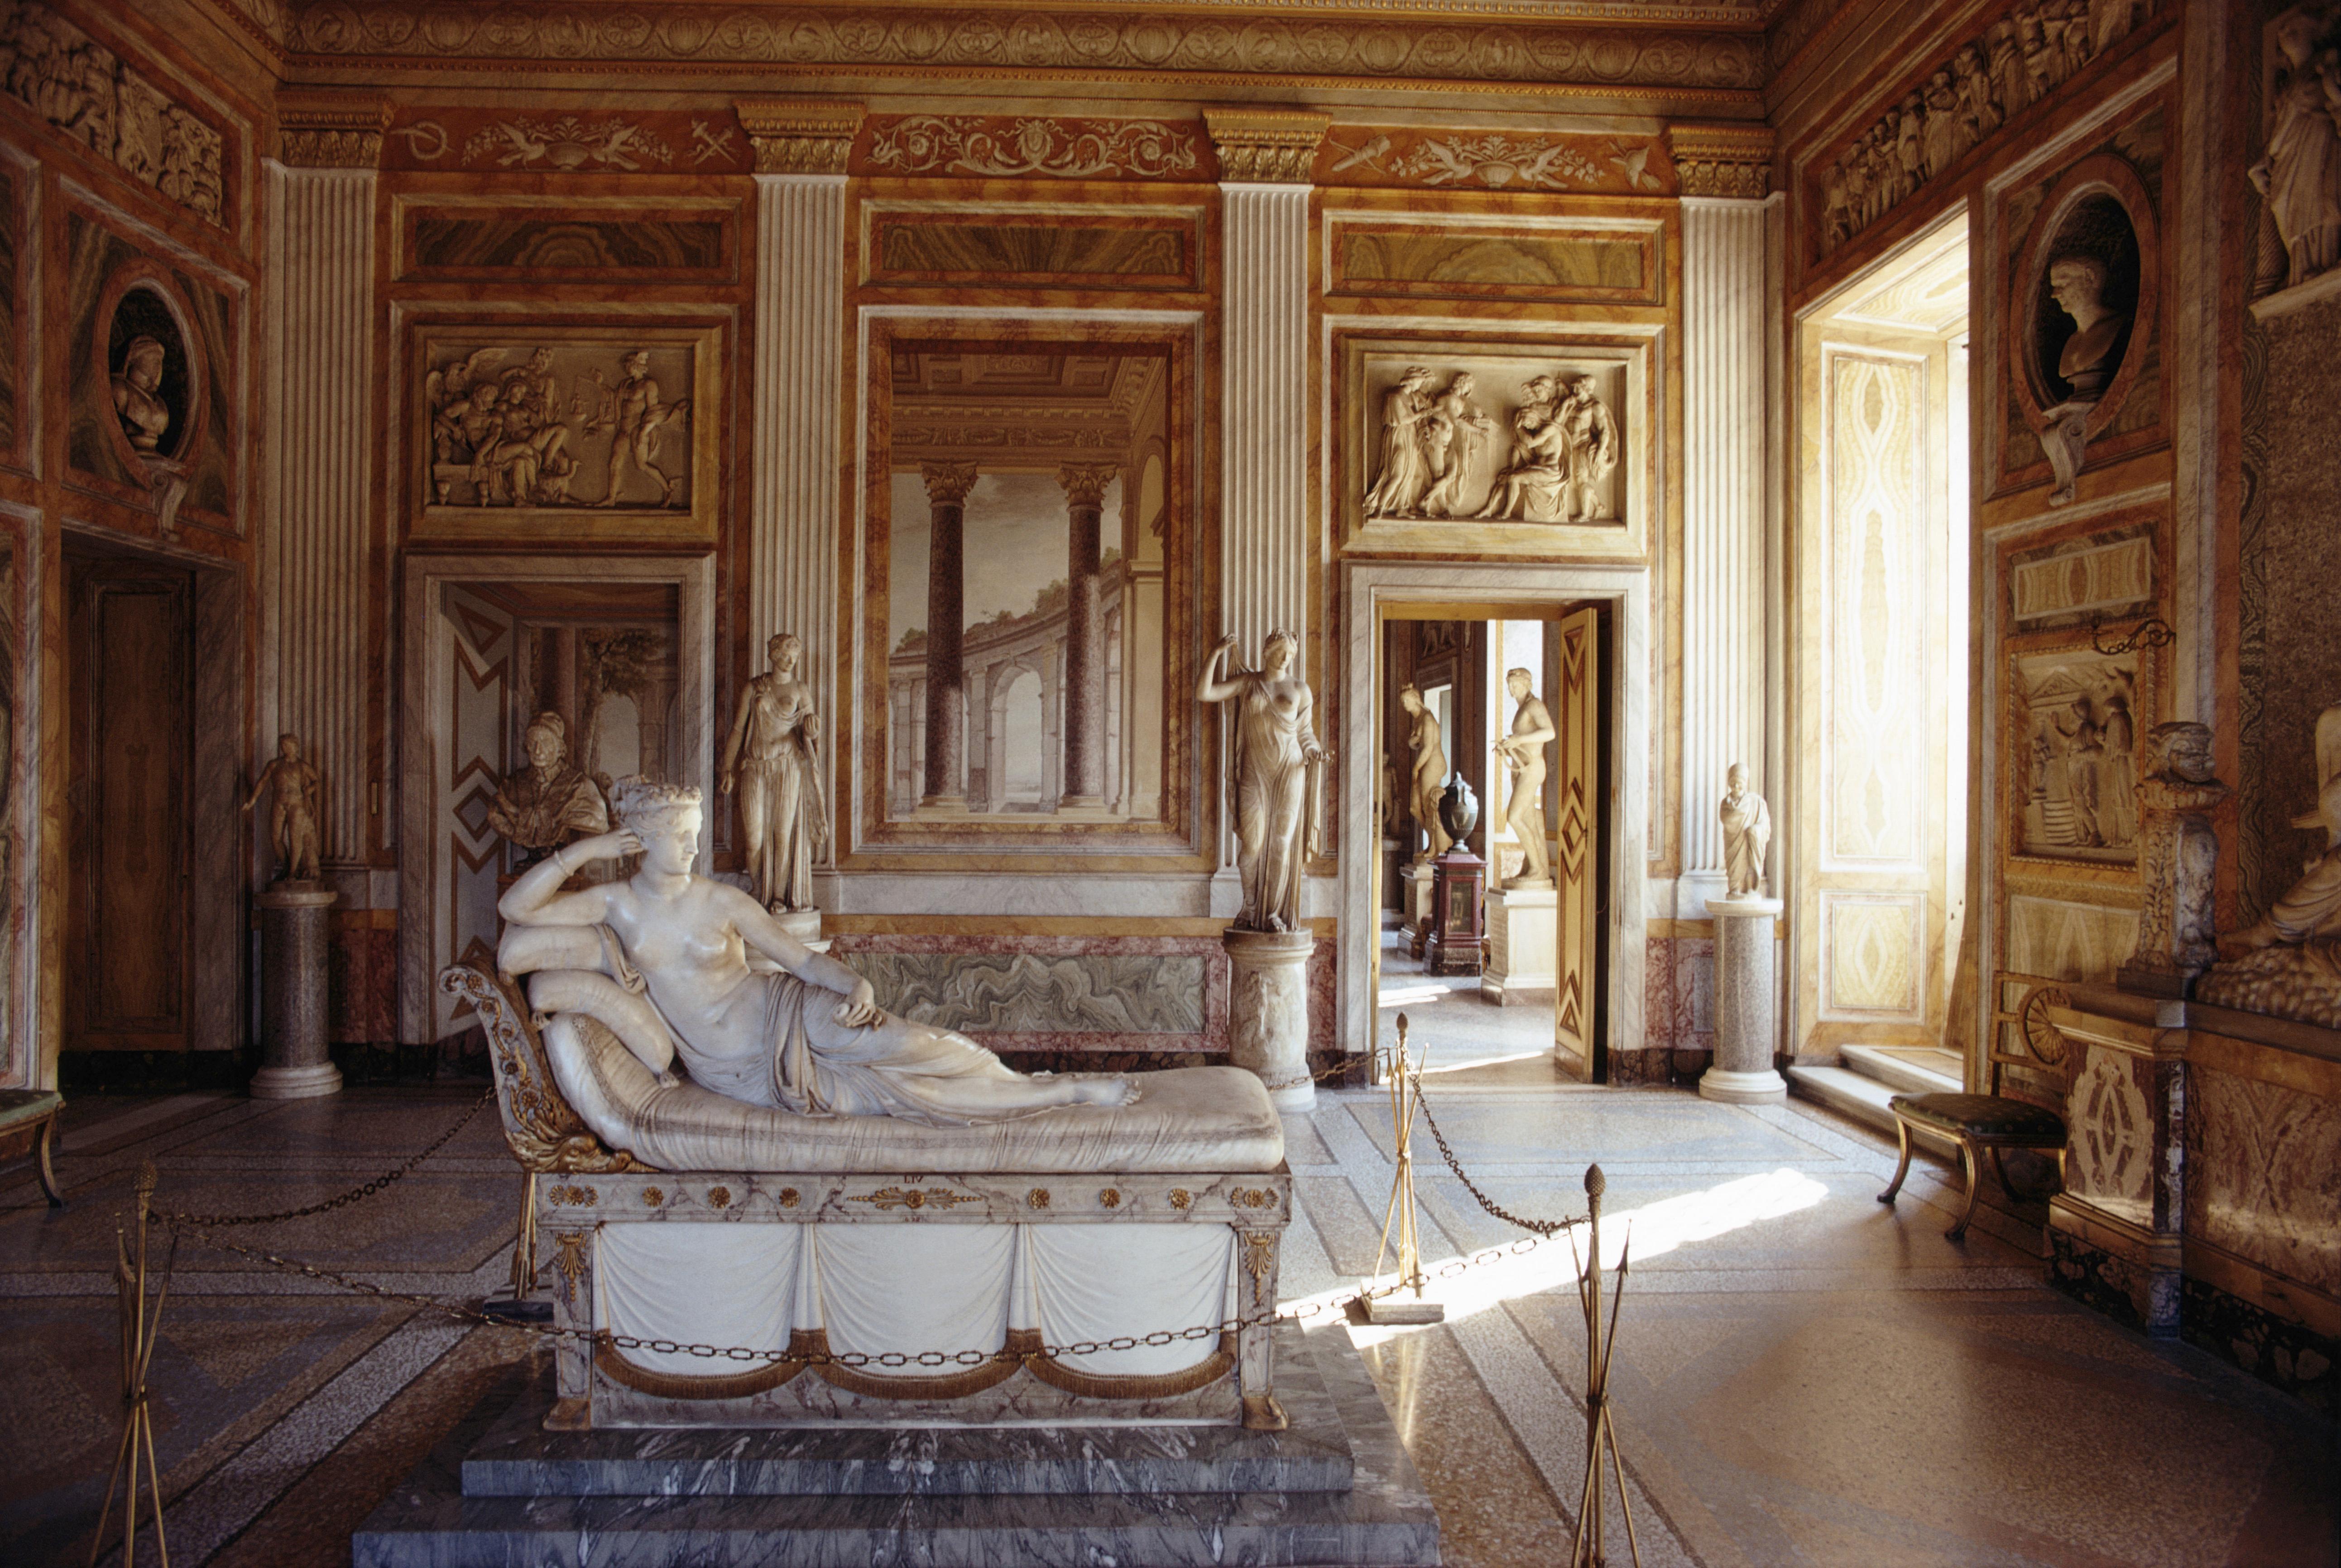 Slim Aarons
Canova Sculpture at the Villa Borghese
1970
C print
Estate stamped and hand numbered edition of 150 with certificate of authenticity from the estate.   

'Pauline Bonaparte as Venus Victrix', a sculpture by the Italian sculptor Antonio